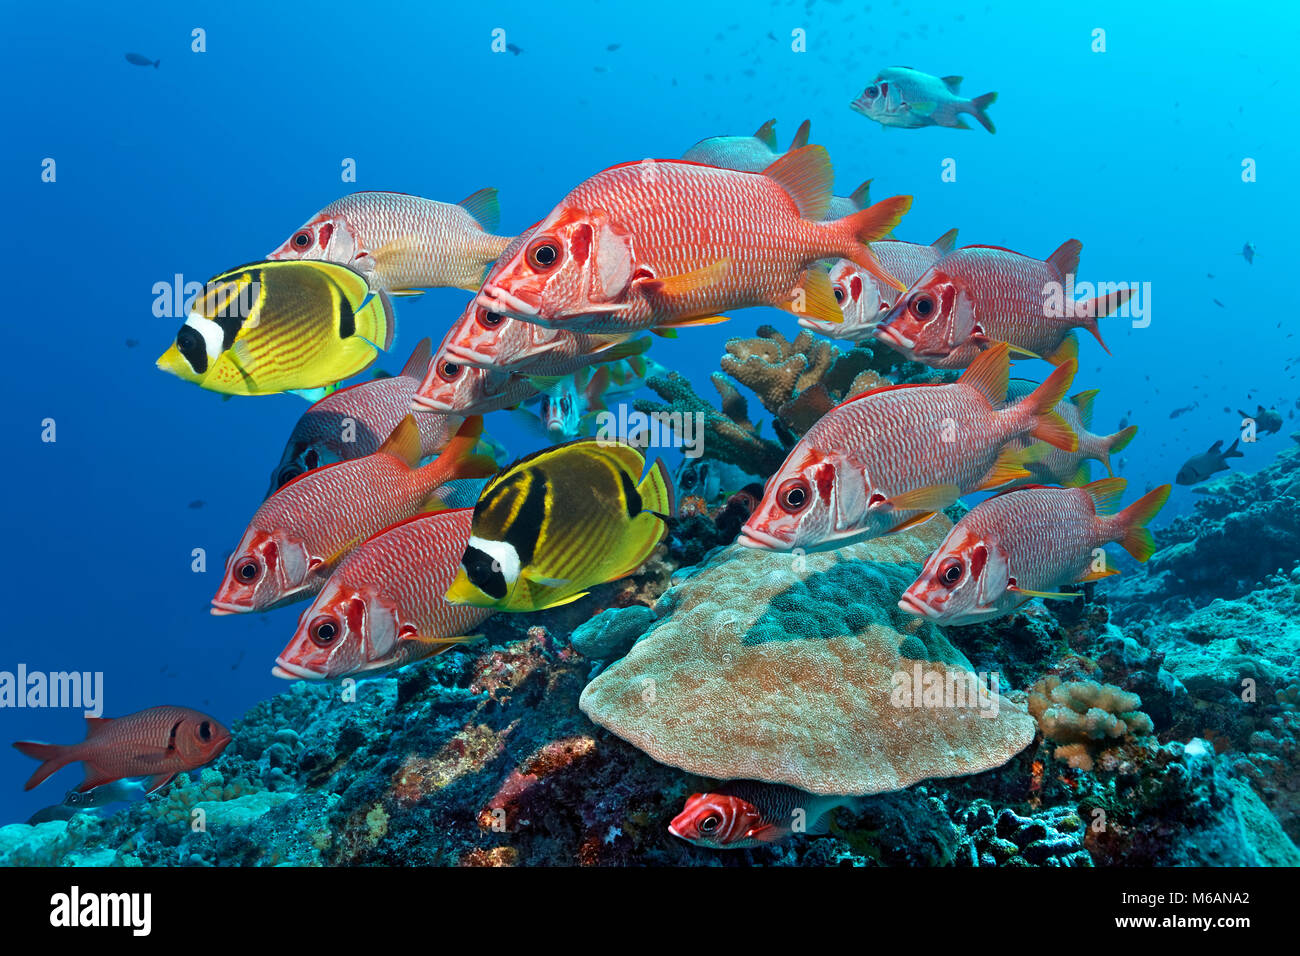 Swarm Sabre squirrelfish (Sargocentron spiniferum), together with Raccoon butterflyfishn (Chaetodon lunula), Pacific Ocean Stock Photo